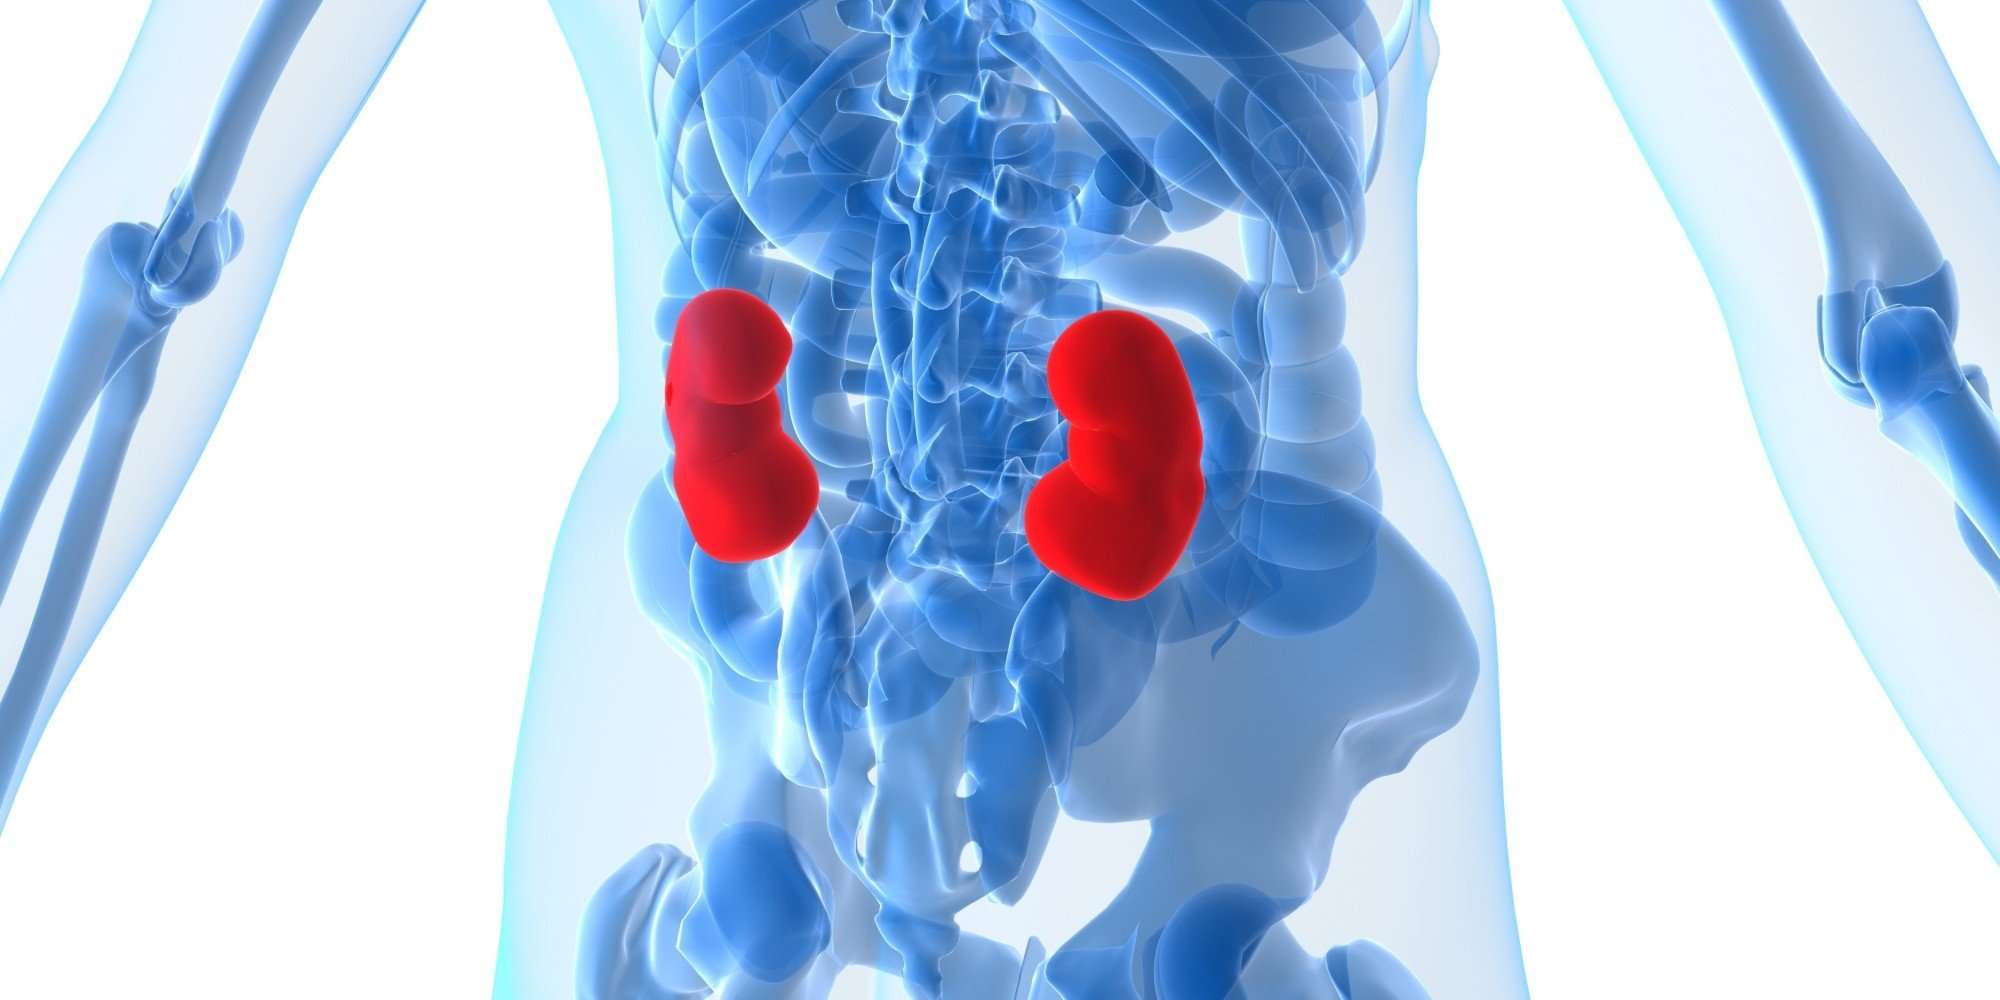 What Everyone Should Know About Kidney Cancer